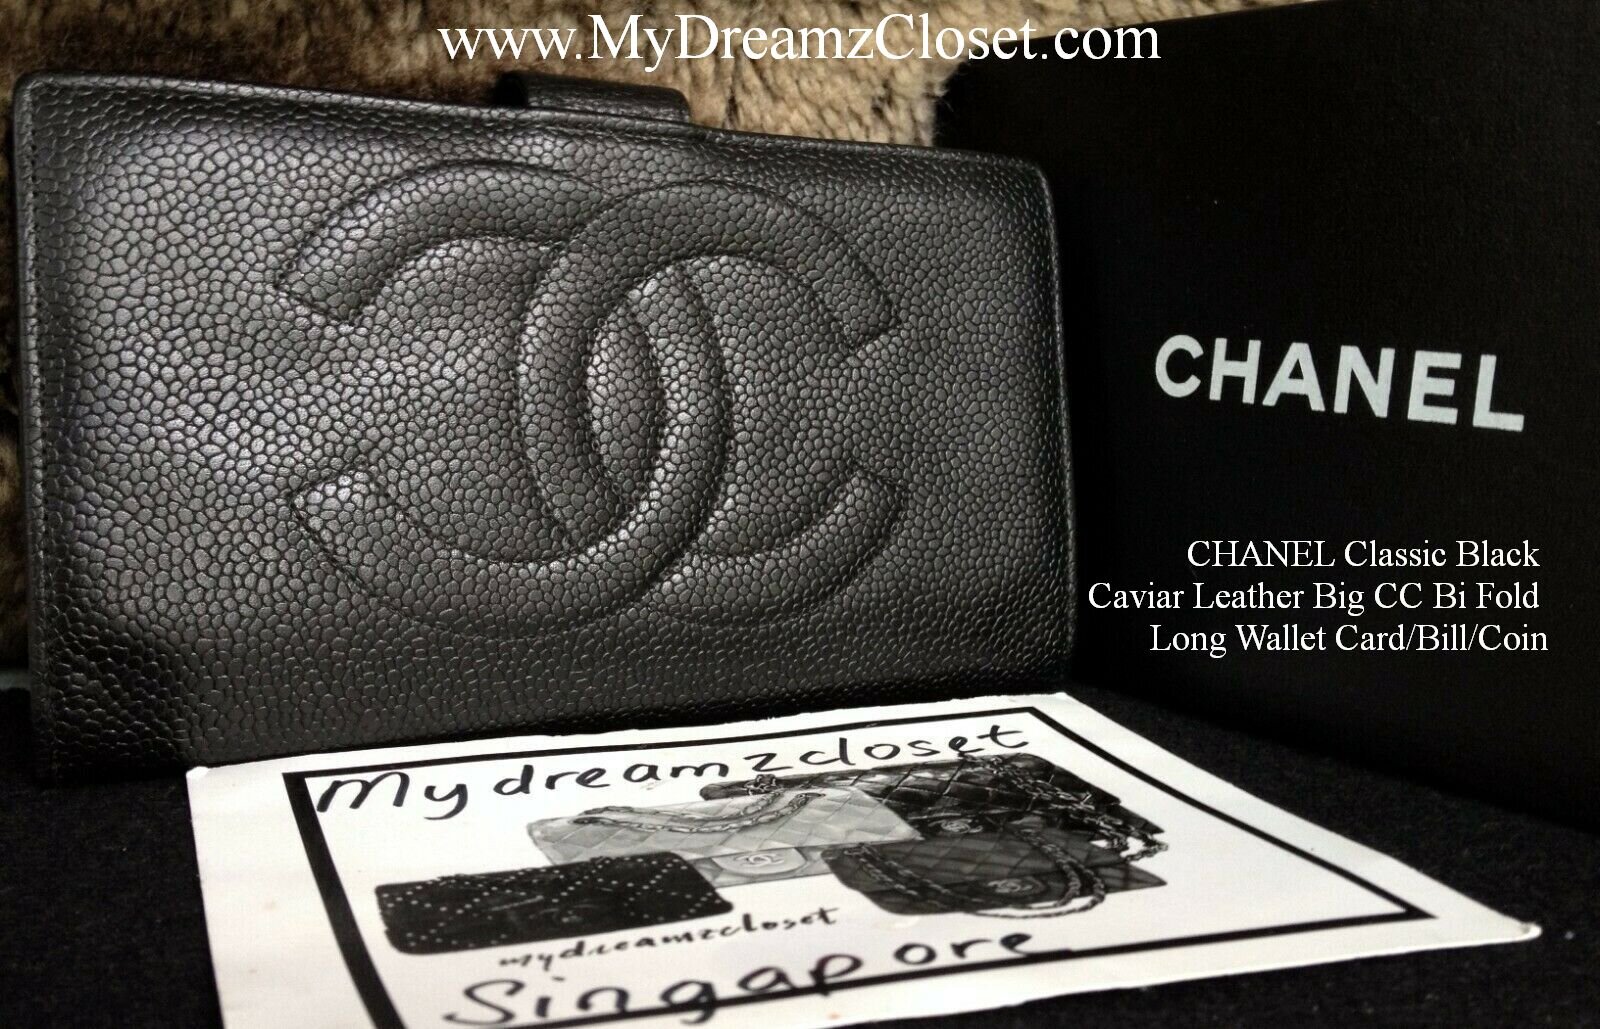 CHANEL, Accessories, Chanel Chocolate Bar Womens Leather Long Wallet  Bifold Black